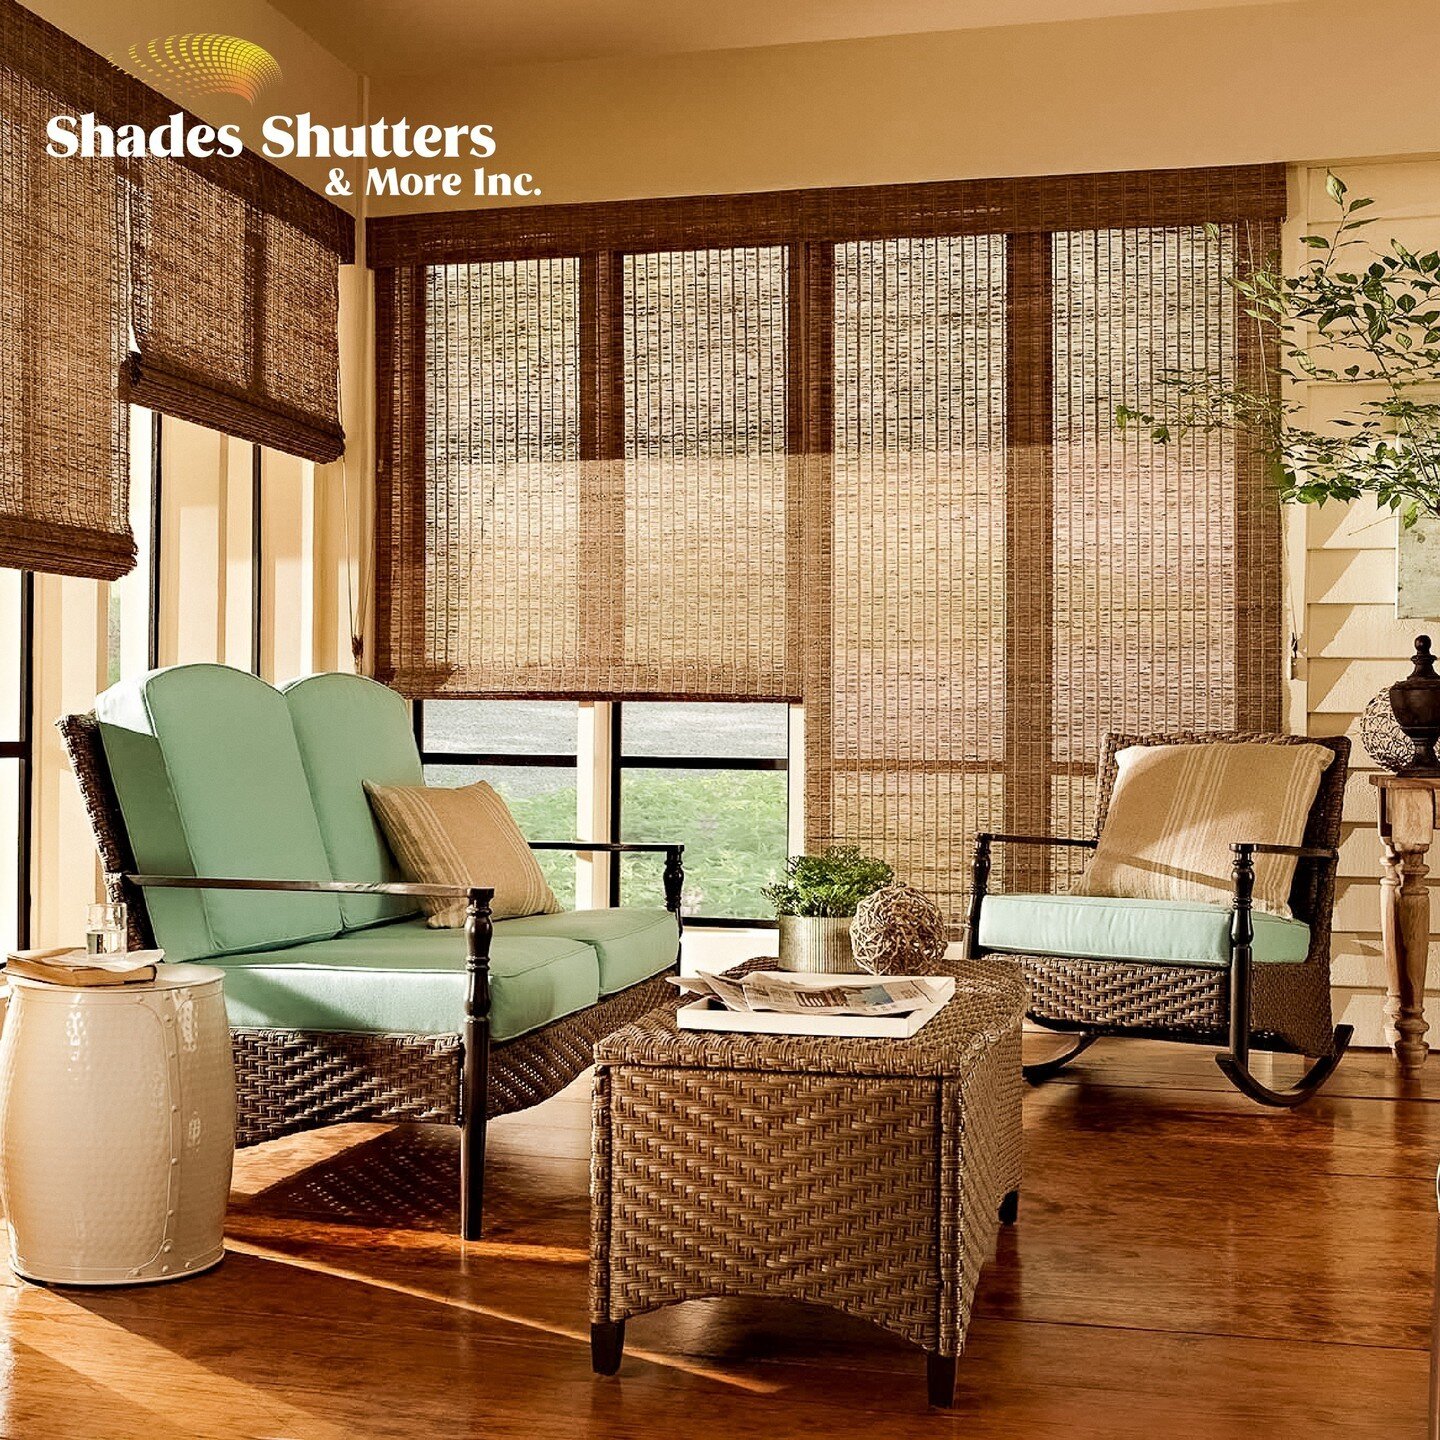 At Shades, Shutters, &amp; More we don&rsquo;t just offer window coverings; we offer truly custom solutions to your interior needs as well as lifelong friendship. We cherish the invitation into your home and want you to feel empowered every step of t